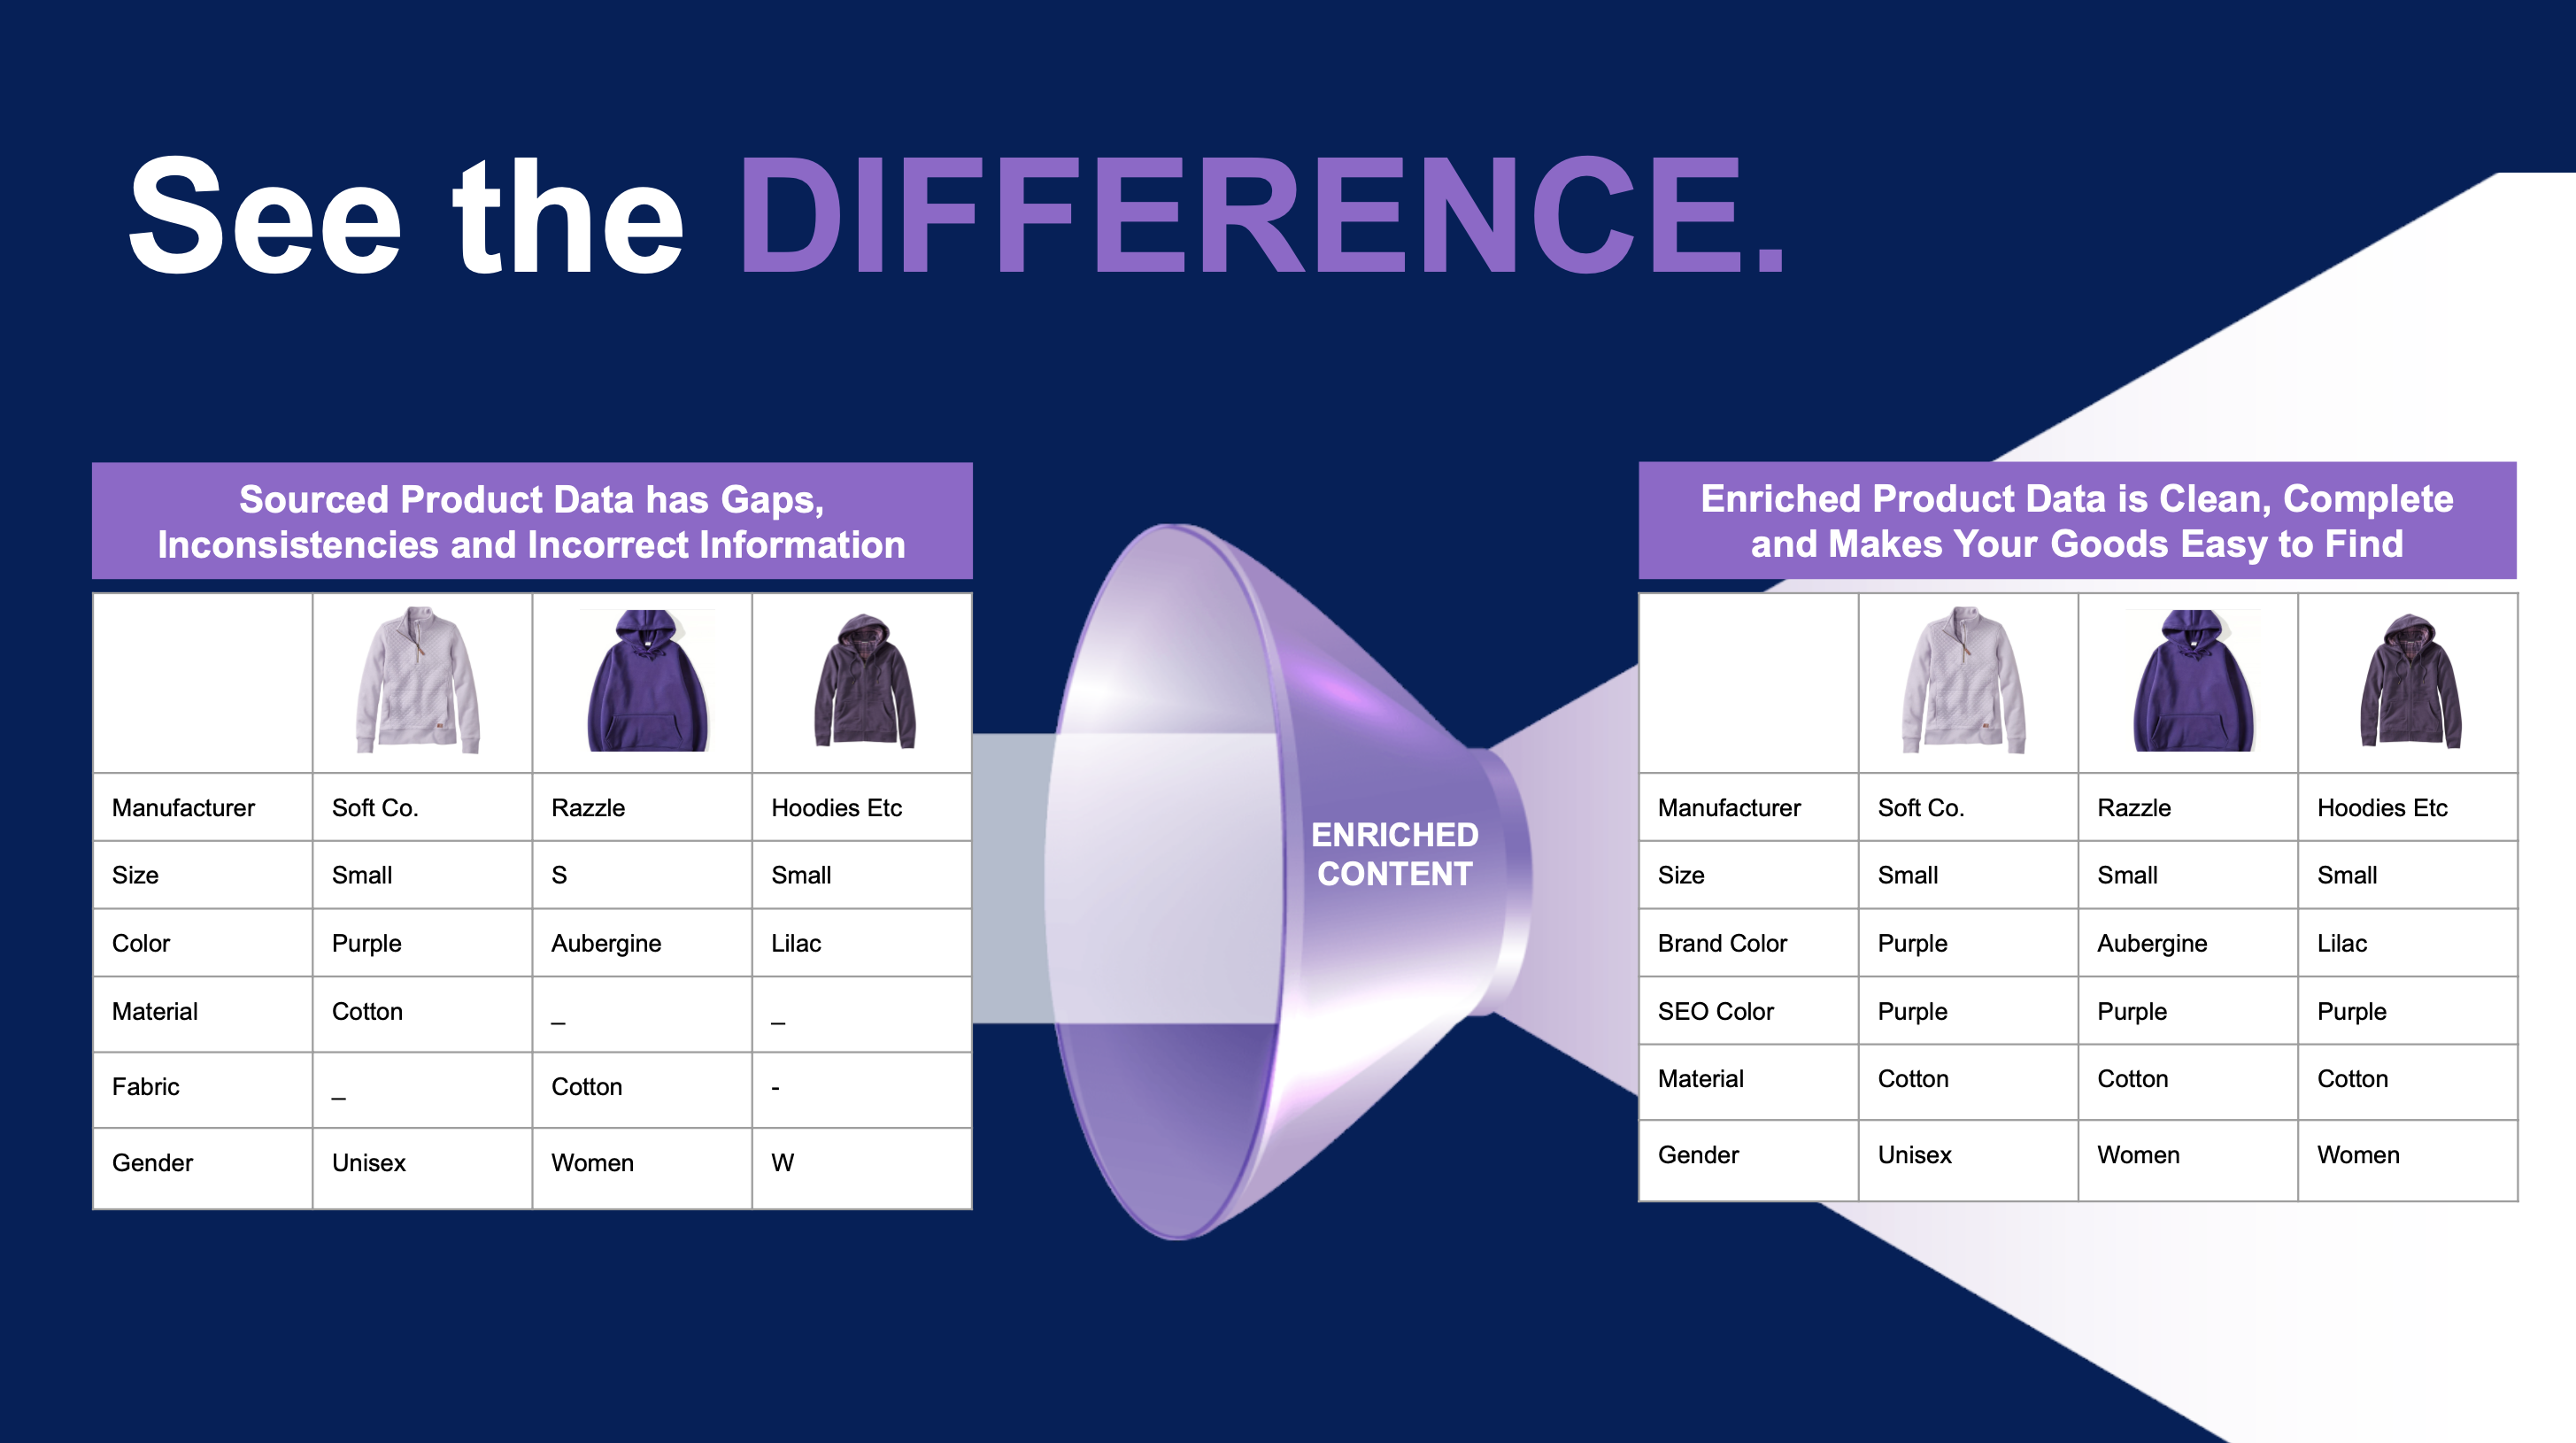 In this diagram, you can see how enriched product data makes products easy for customers to find and compare.